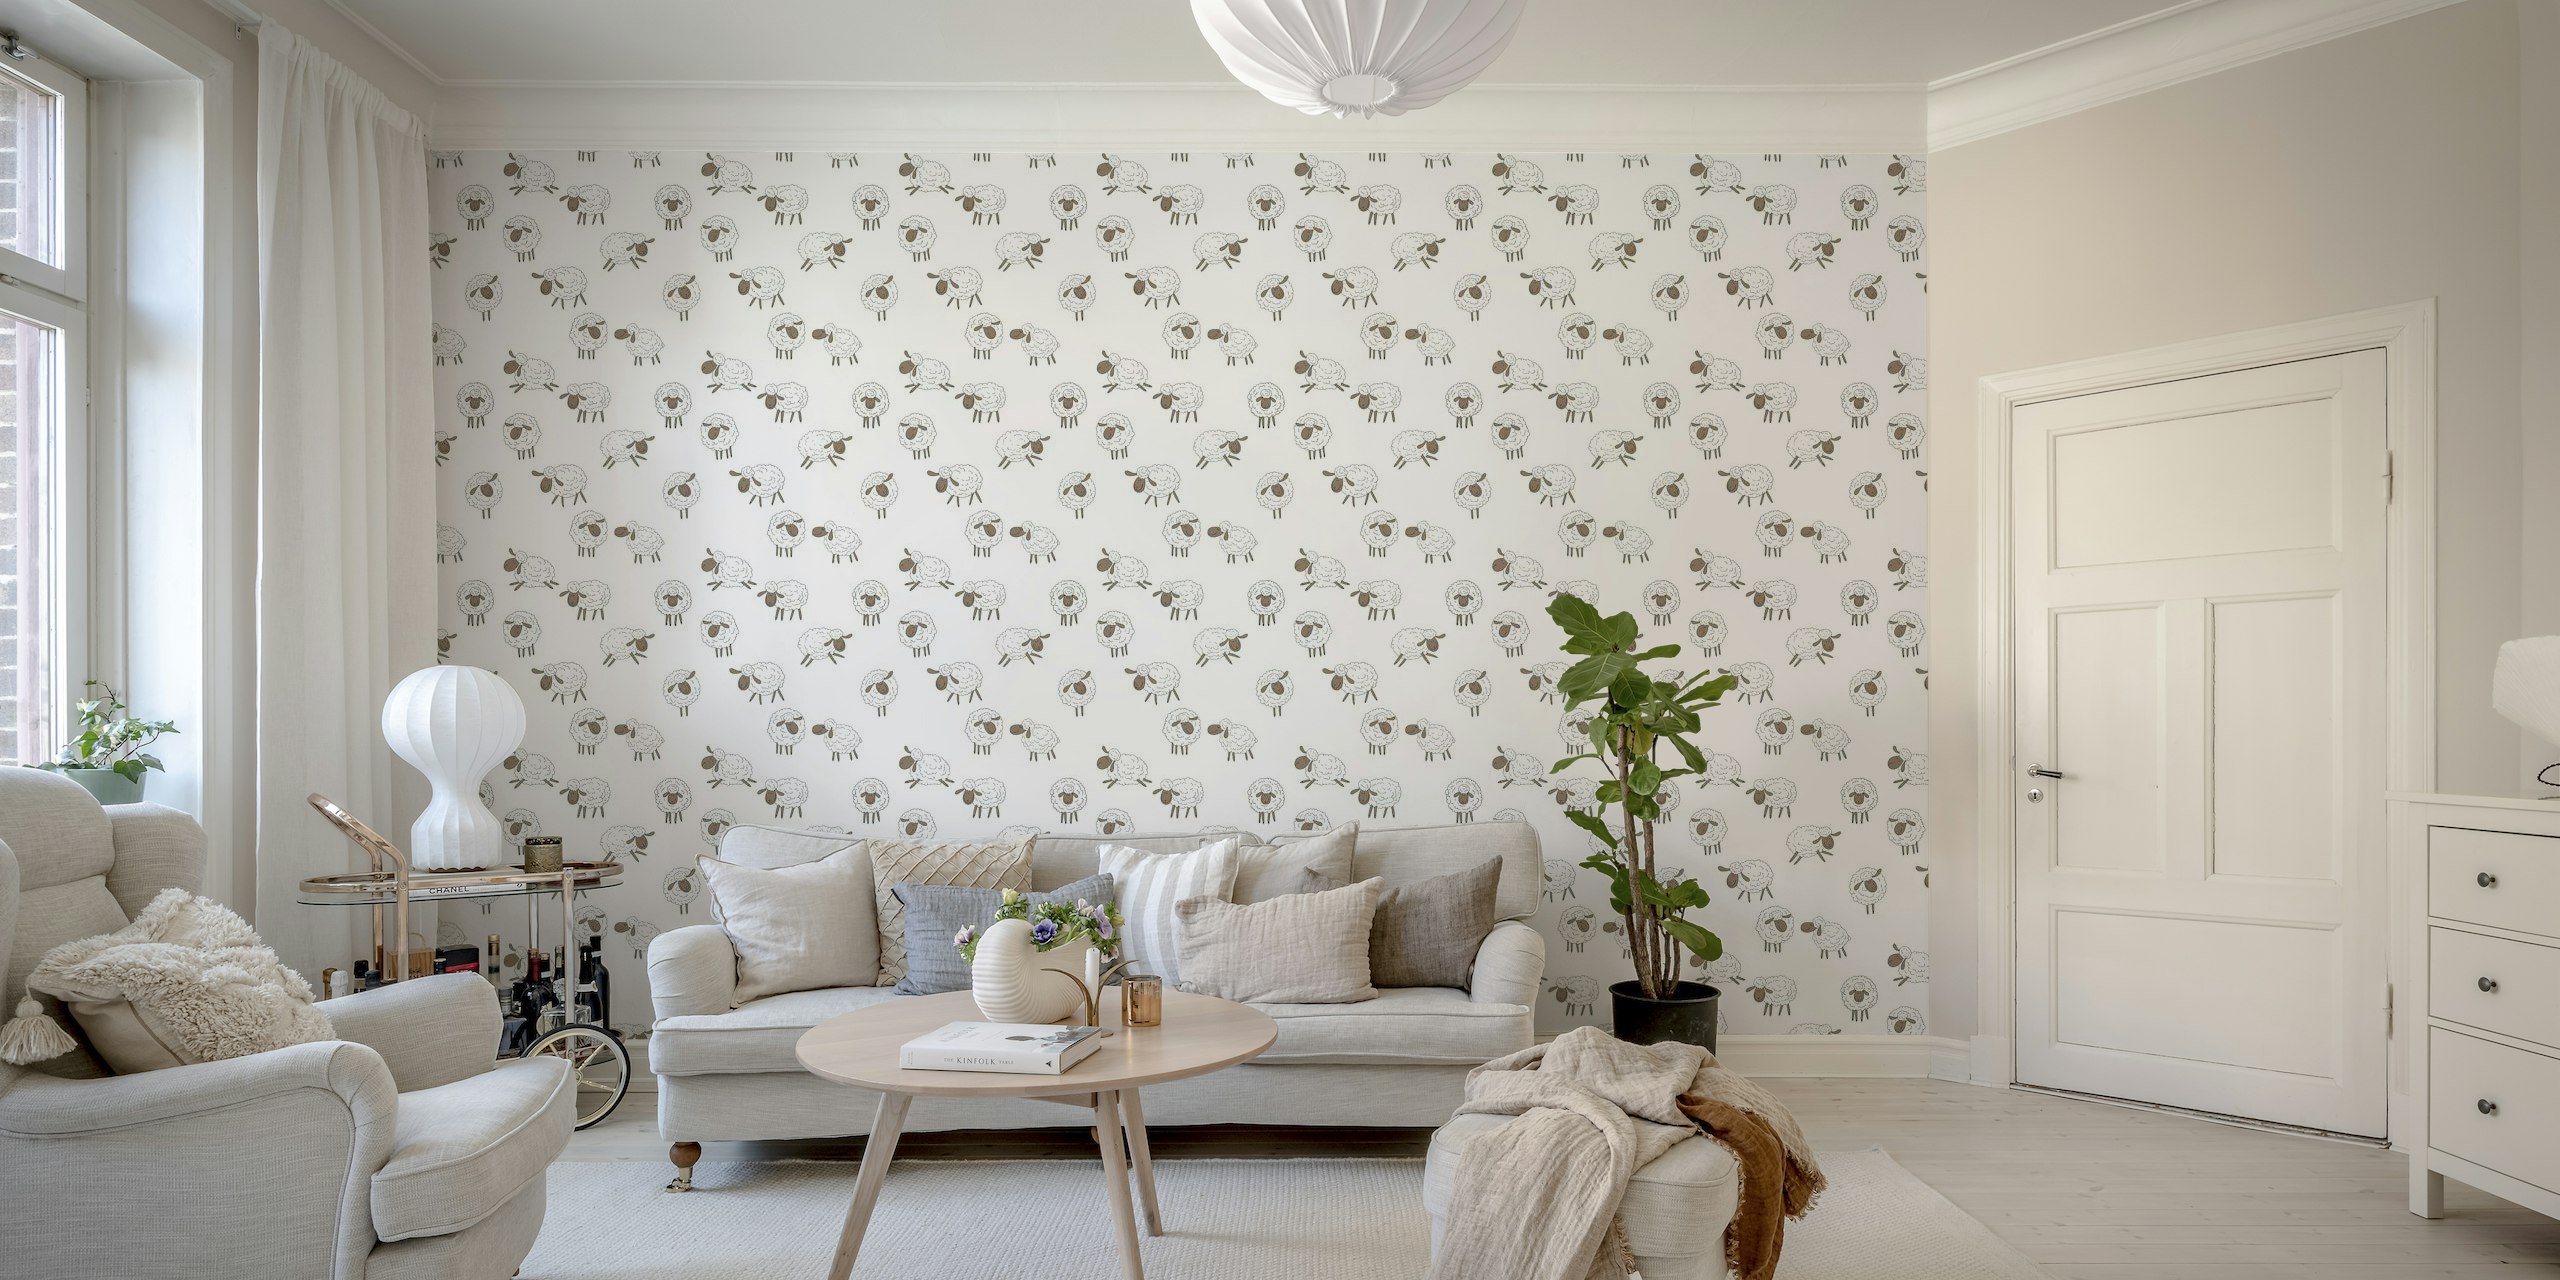 Counting sheep on pure white wallpaper